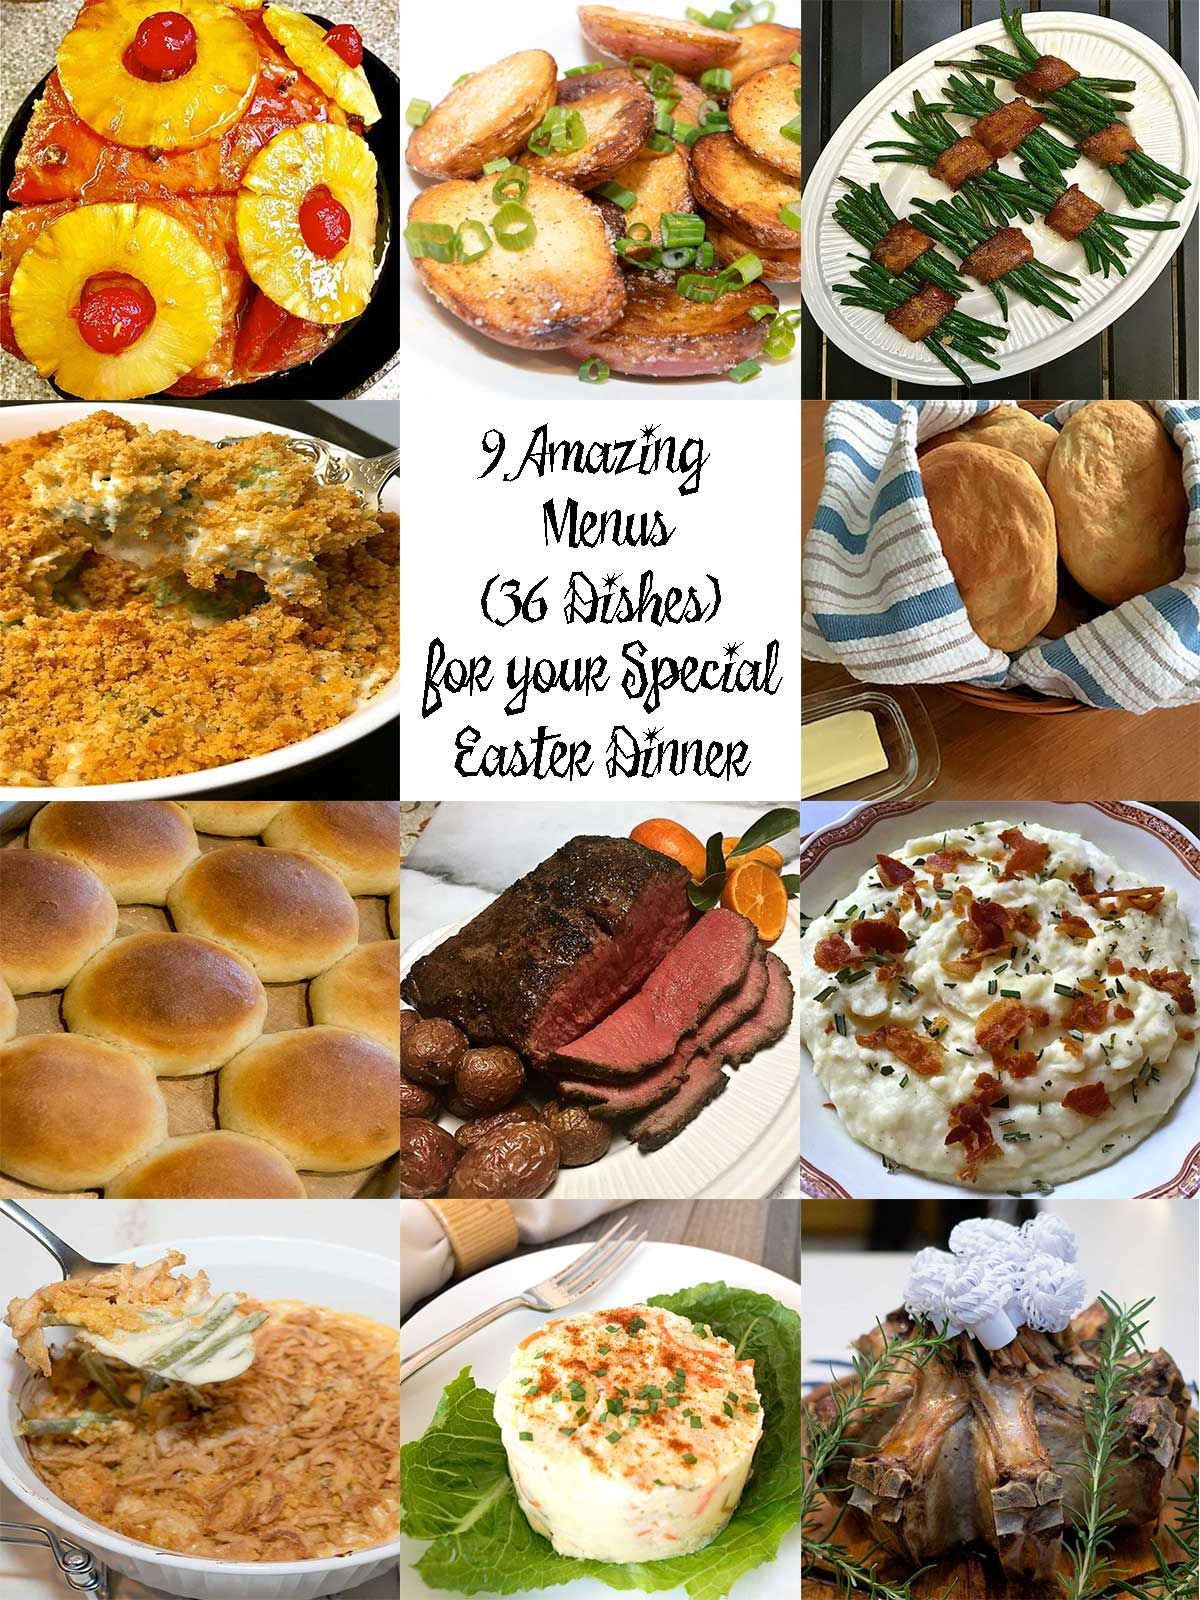 Menu For Easter Dinner
 everyday recipes from simple to sophisticated